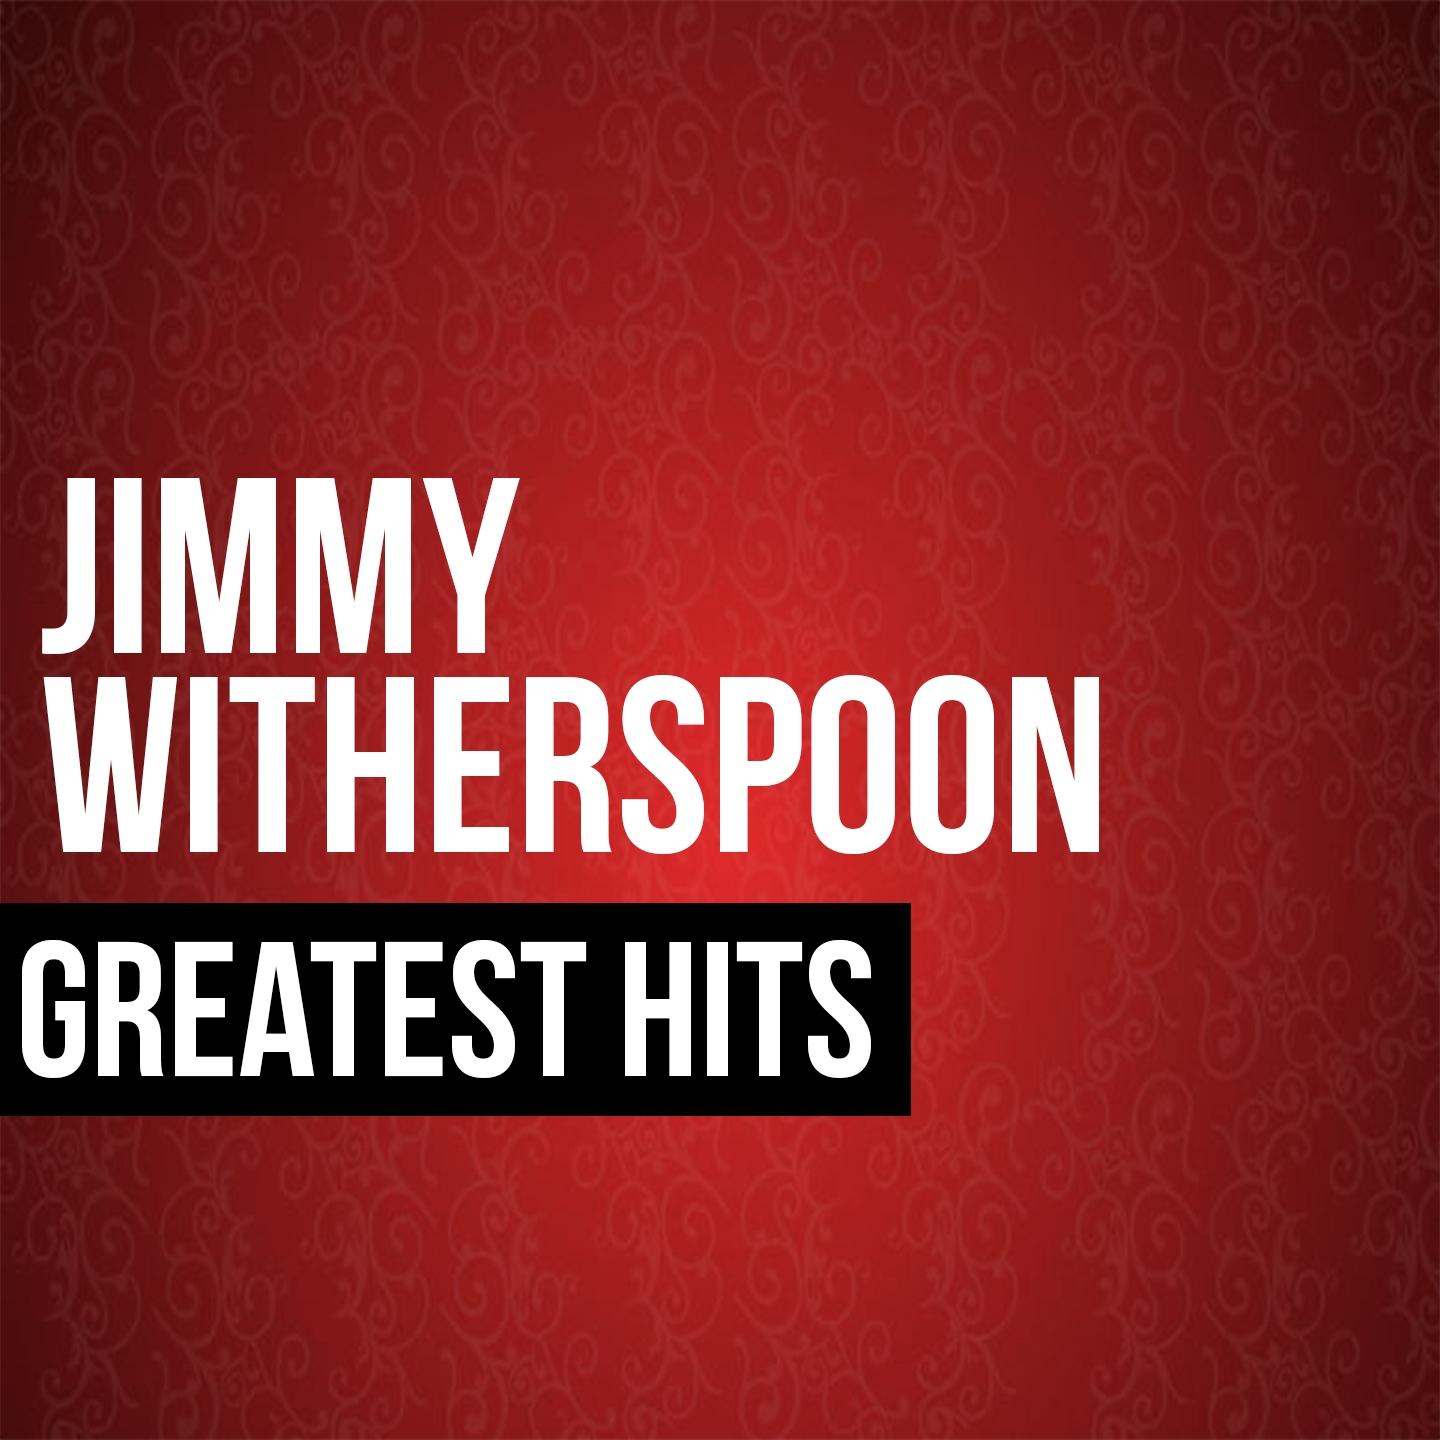 Jimmy Witherspoon Greatest Hits